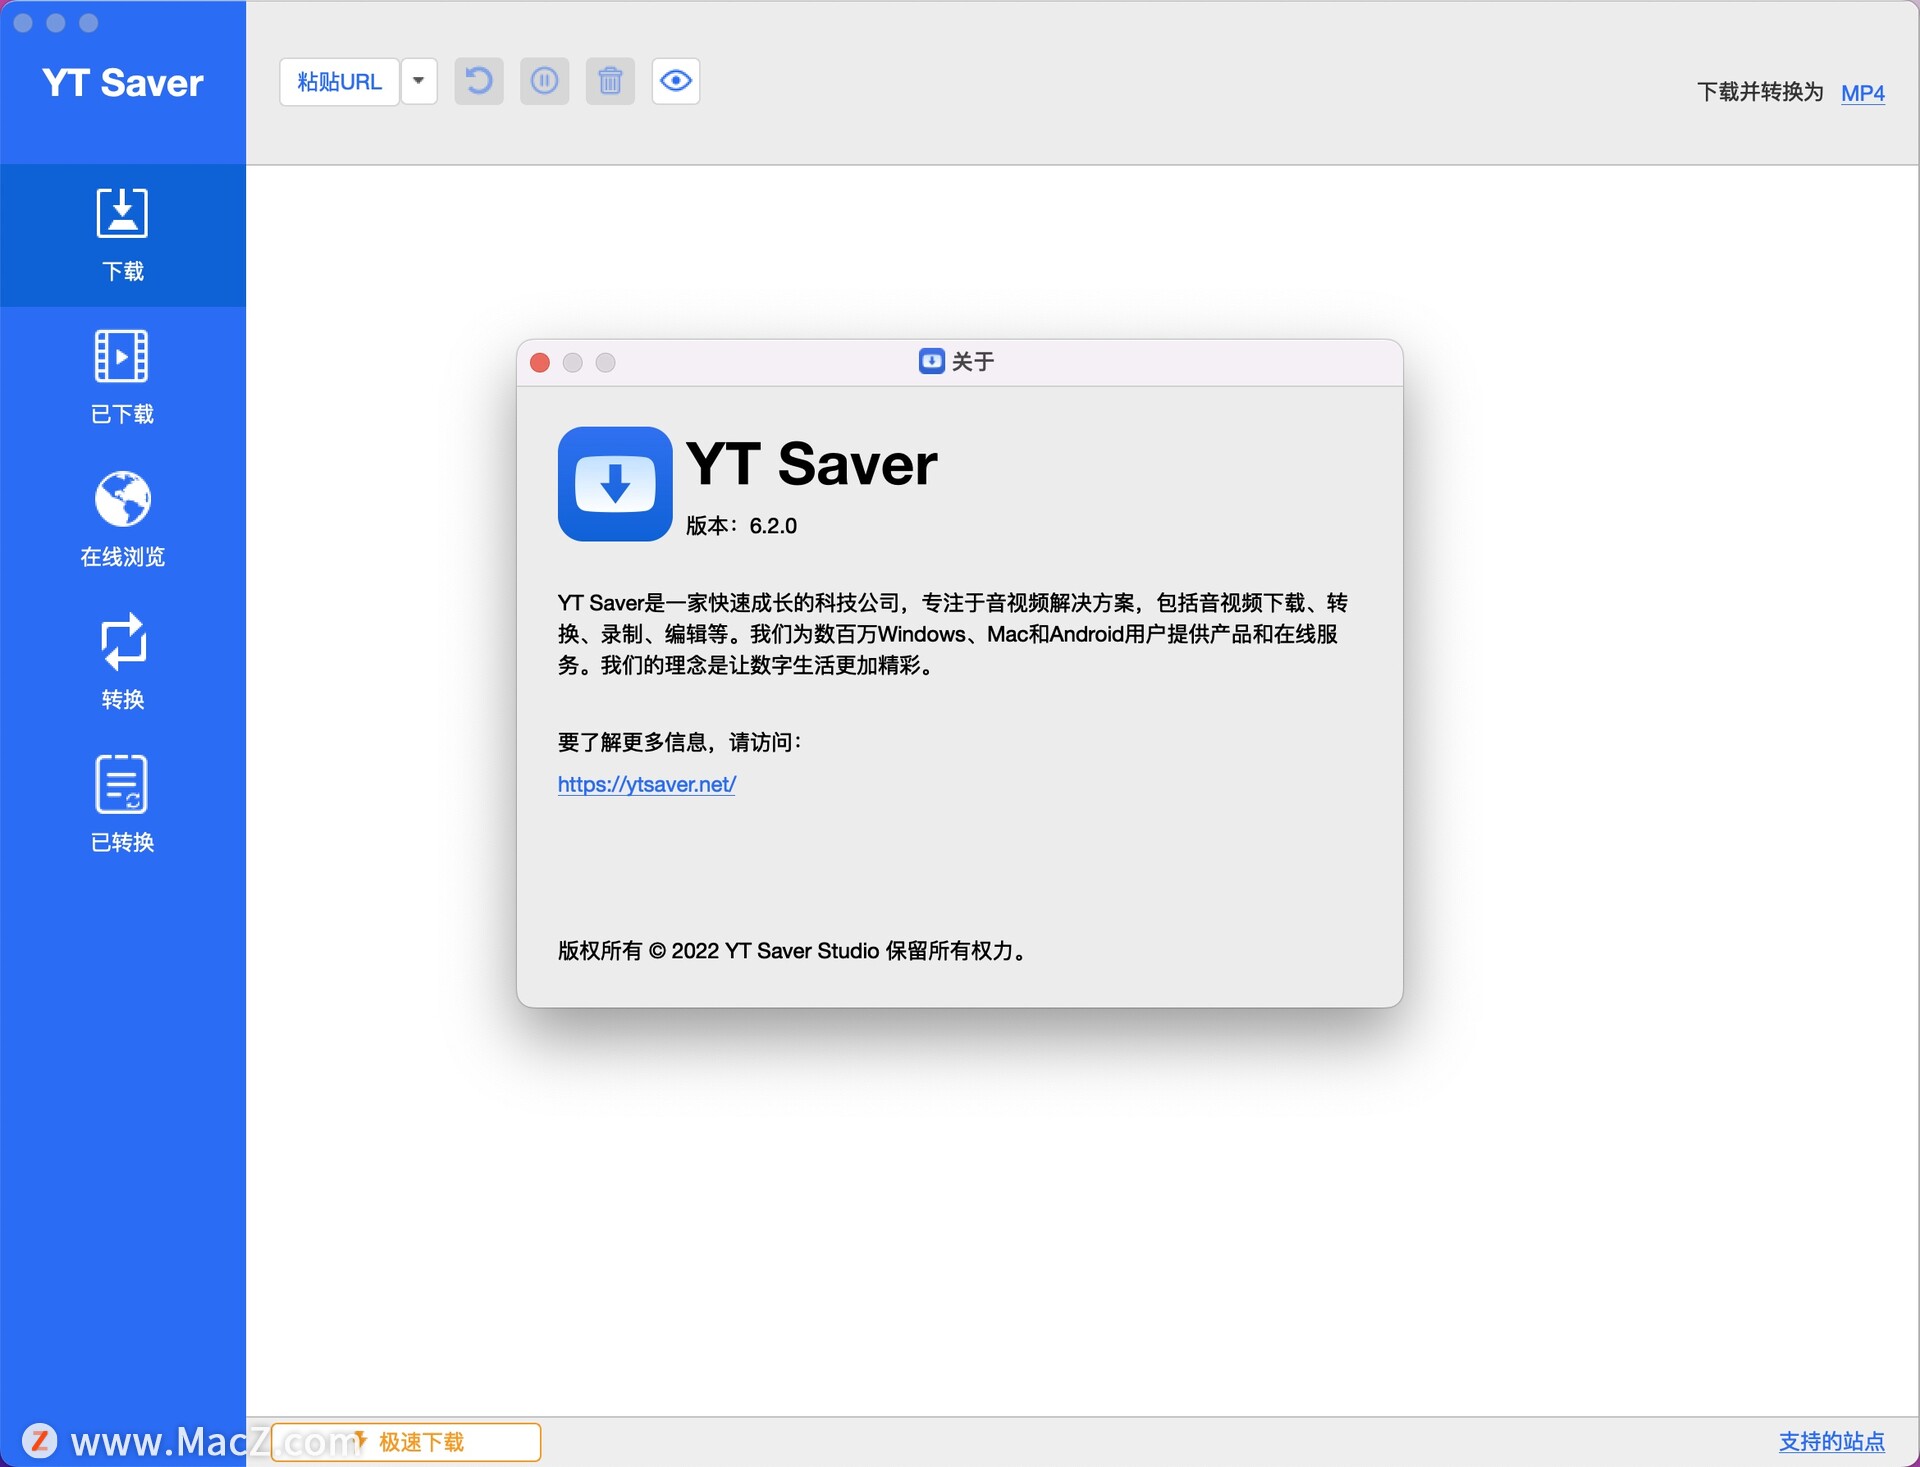 YT Saver 7.3.0 download the last version for mac